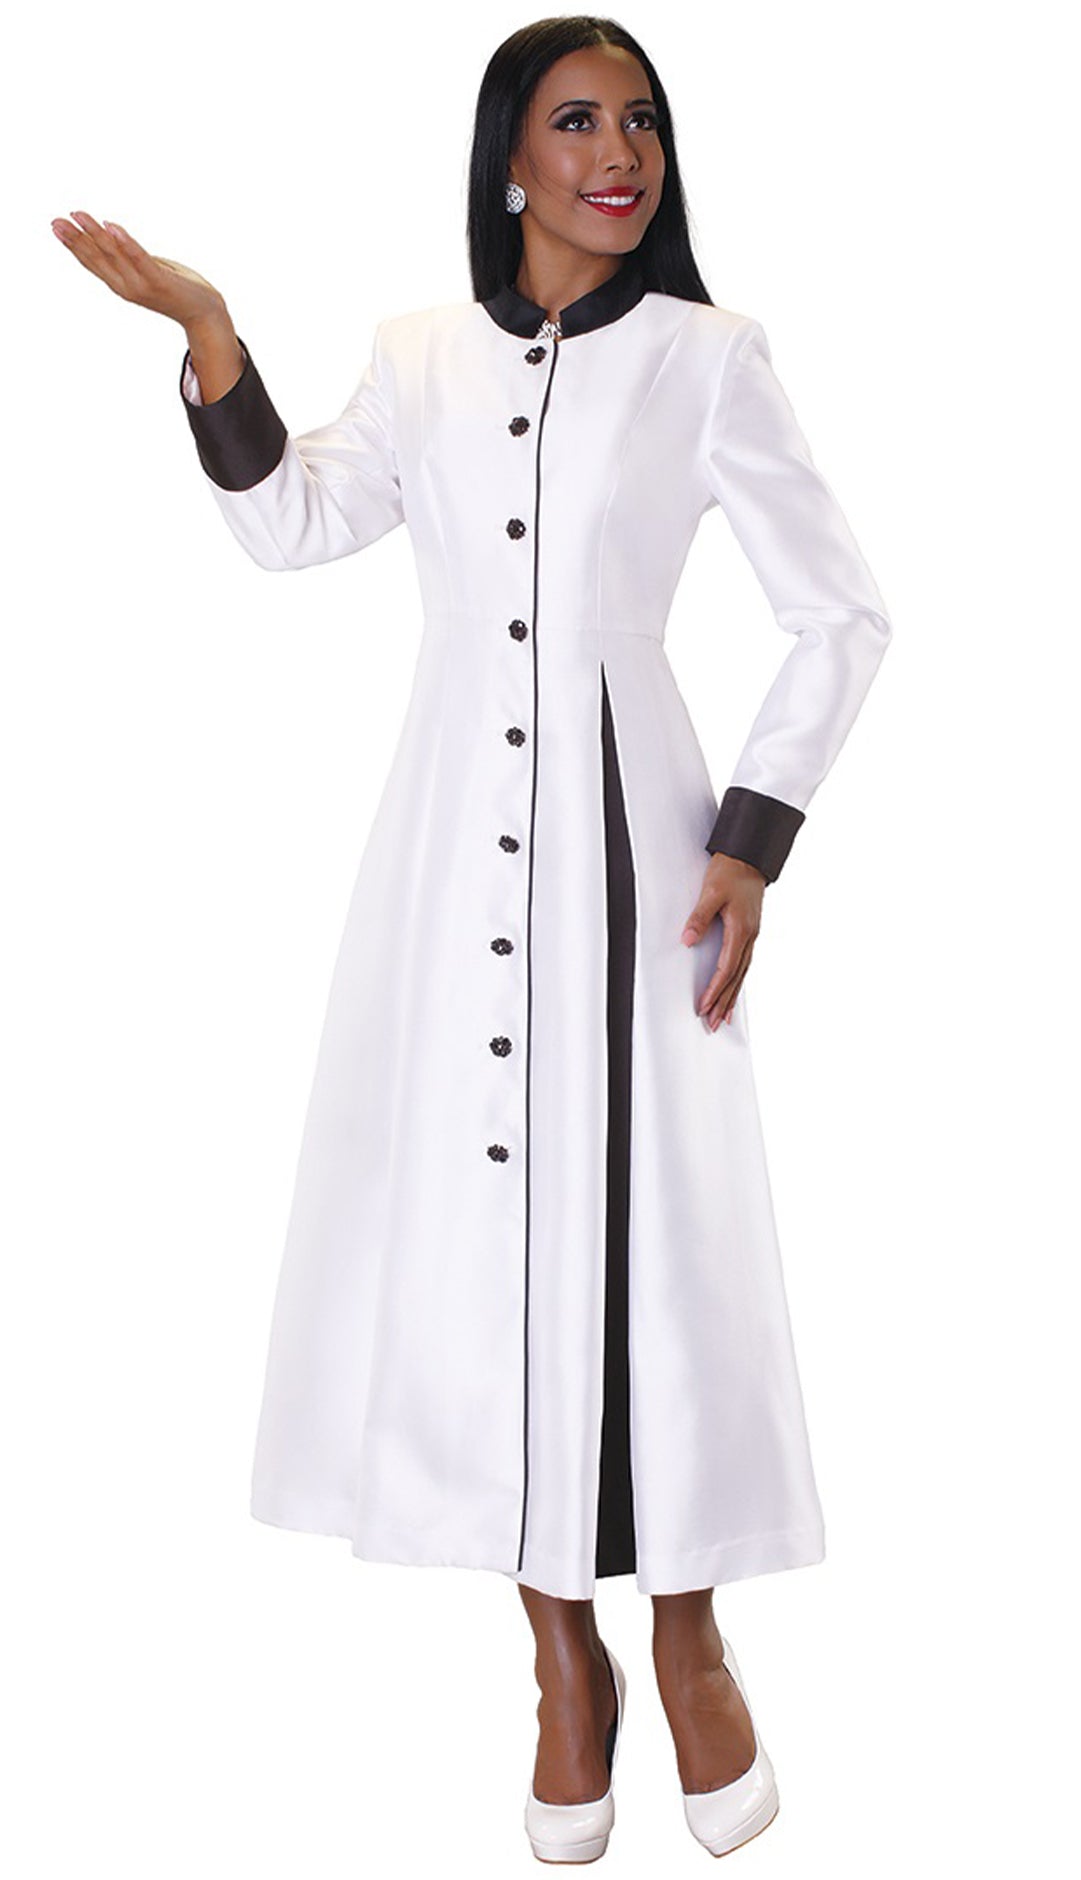 Tally Taylor Robe 4544-White/Black - Church Suits For Less